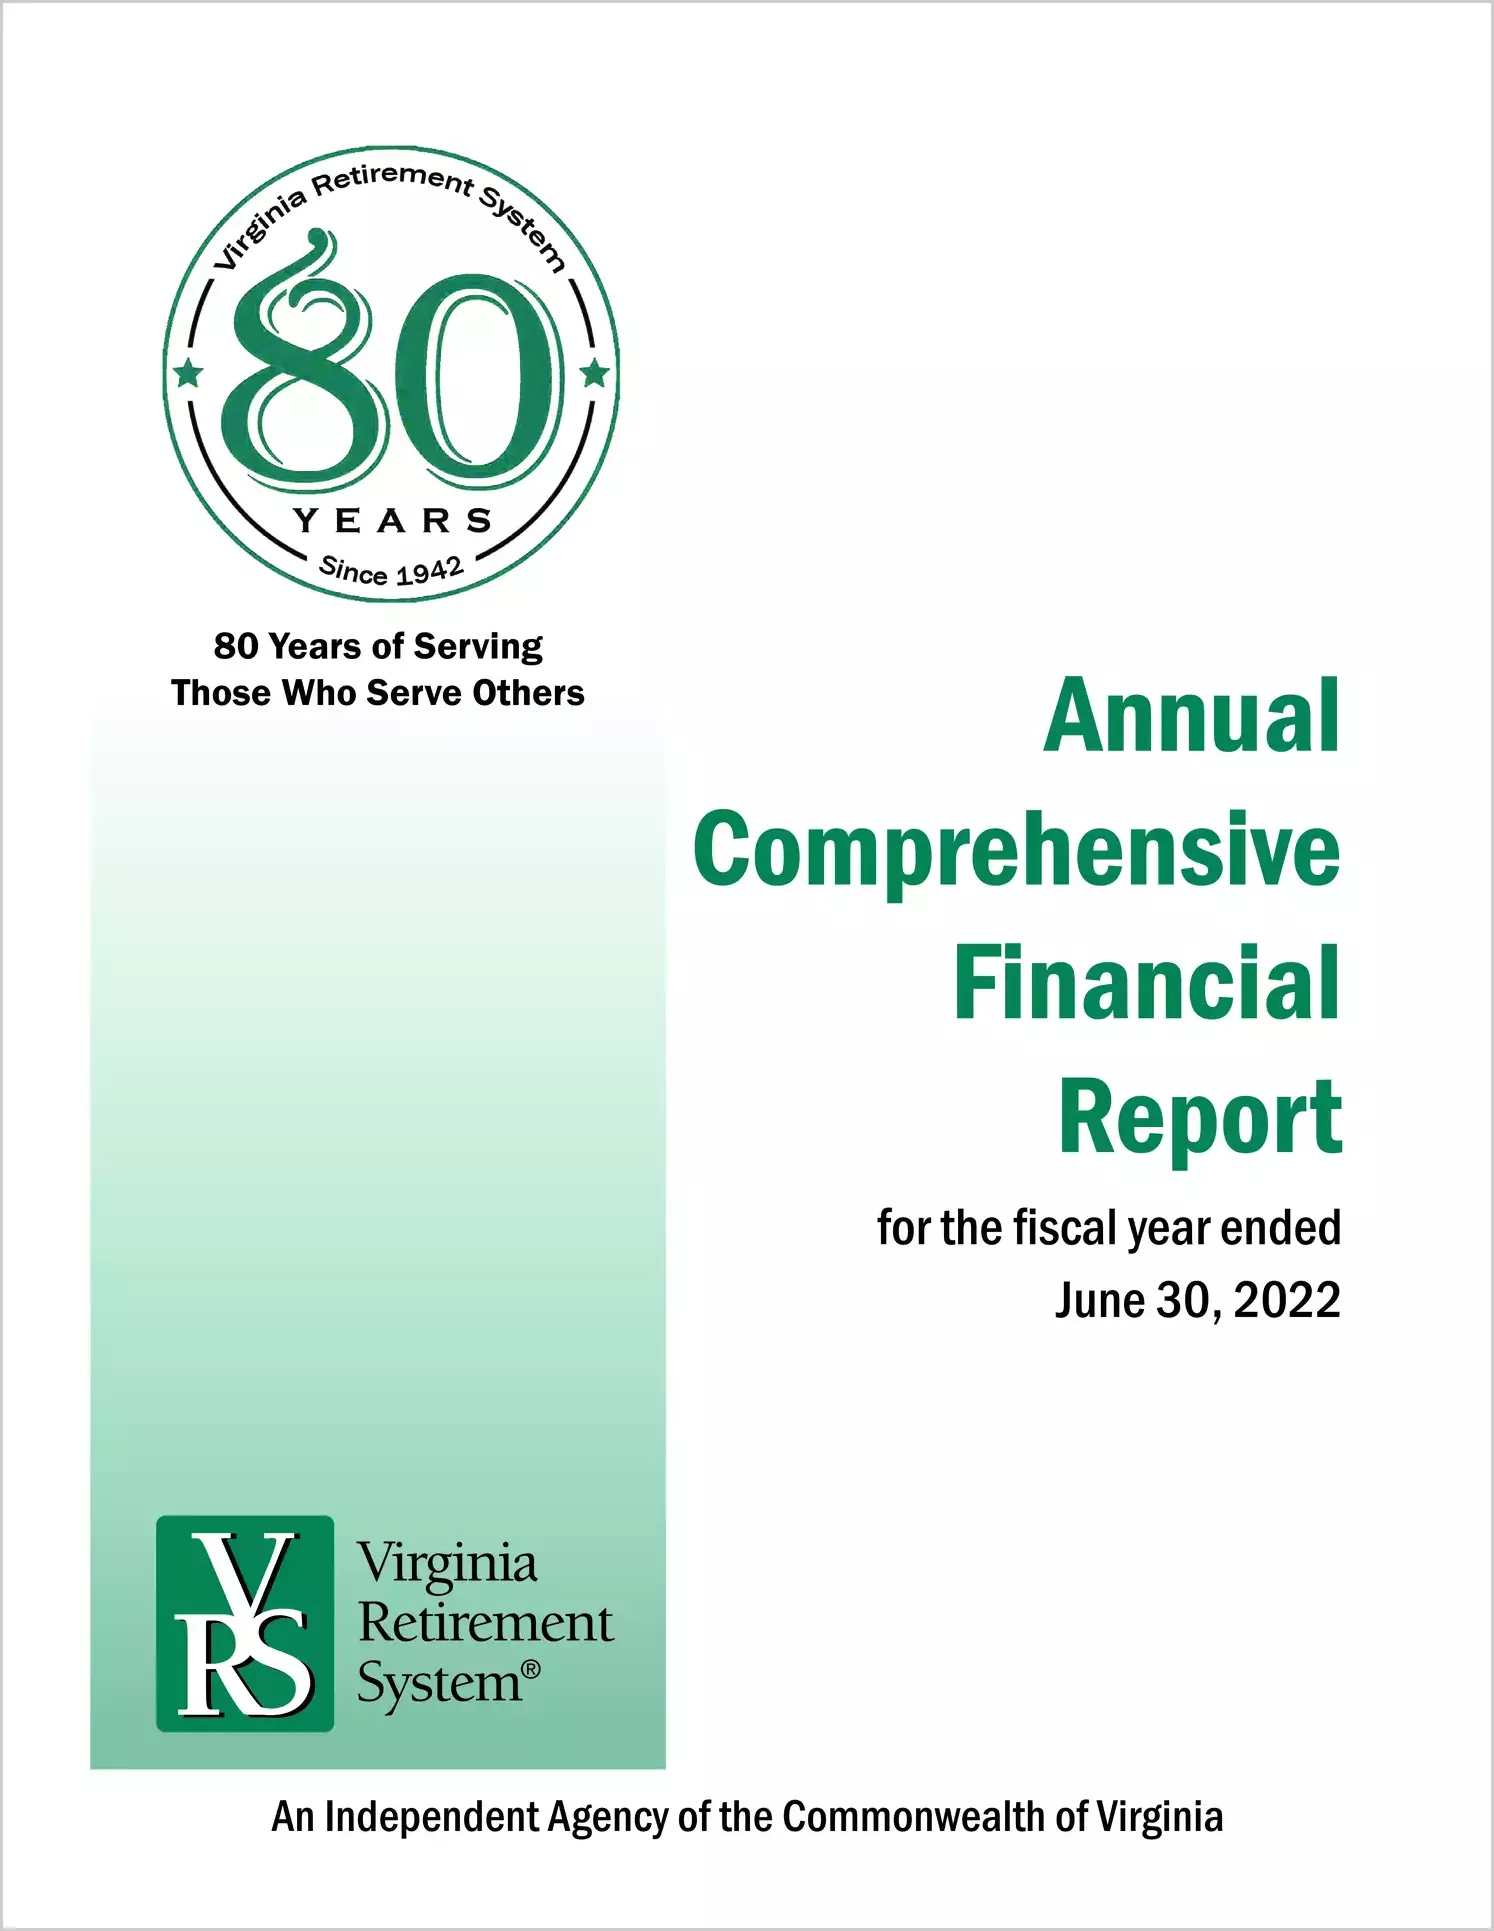 Virginia Retirement System Financial Statements for the year ended June 30, 2022